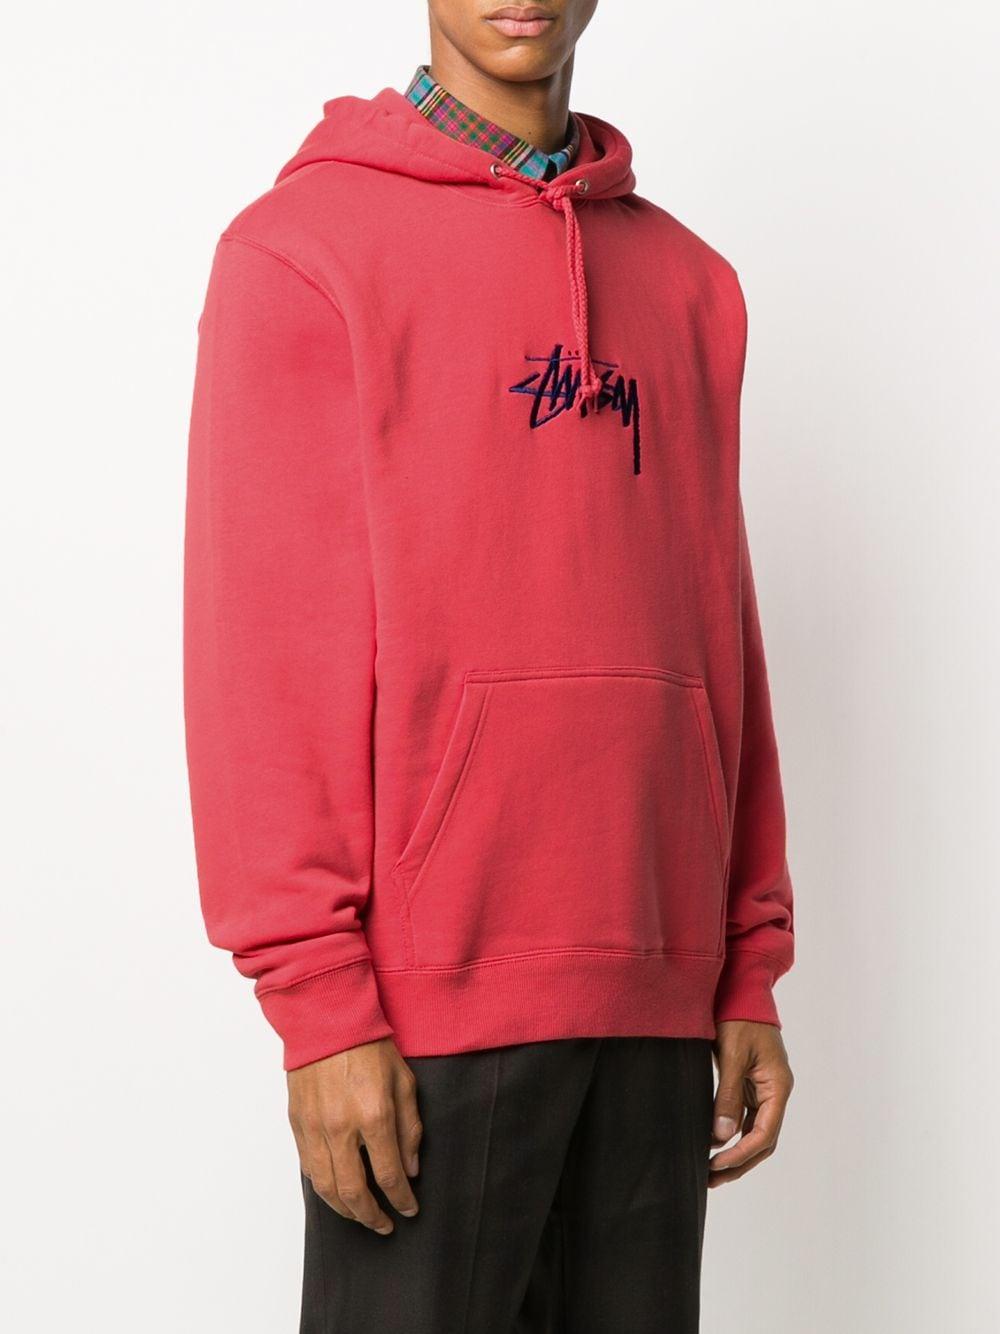 Stussy Cotton Embroidered Logo Hoodie for Men - Lyst